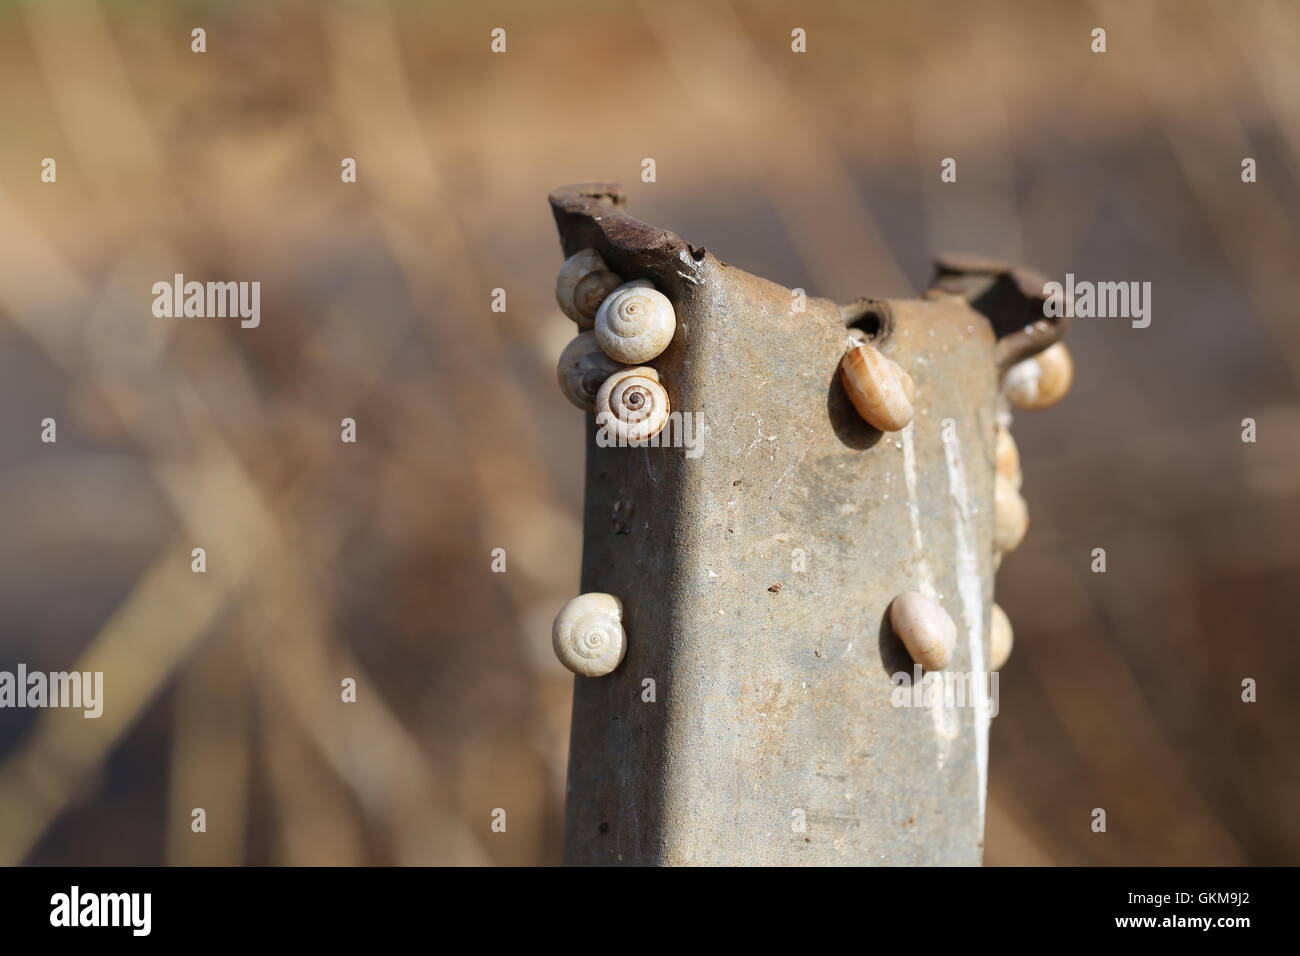 Snails Stuck to a Rusty Rod. Group of white garden snails (also called Mediterranean coastal snail) attaching to a dry stalk, colony of land snails Stock Photo